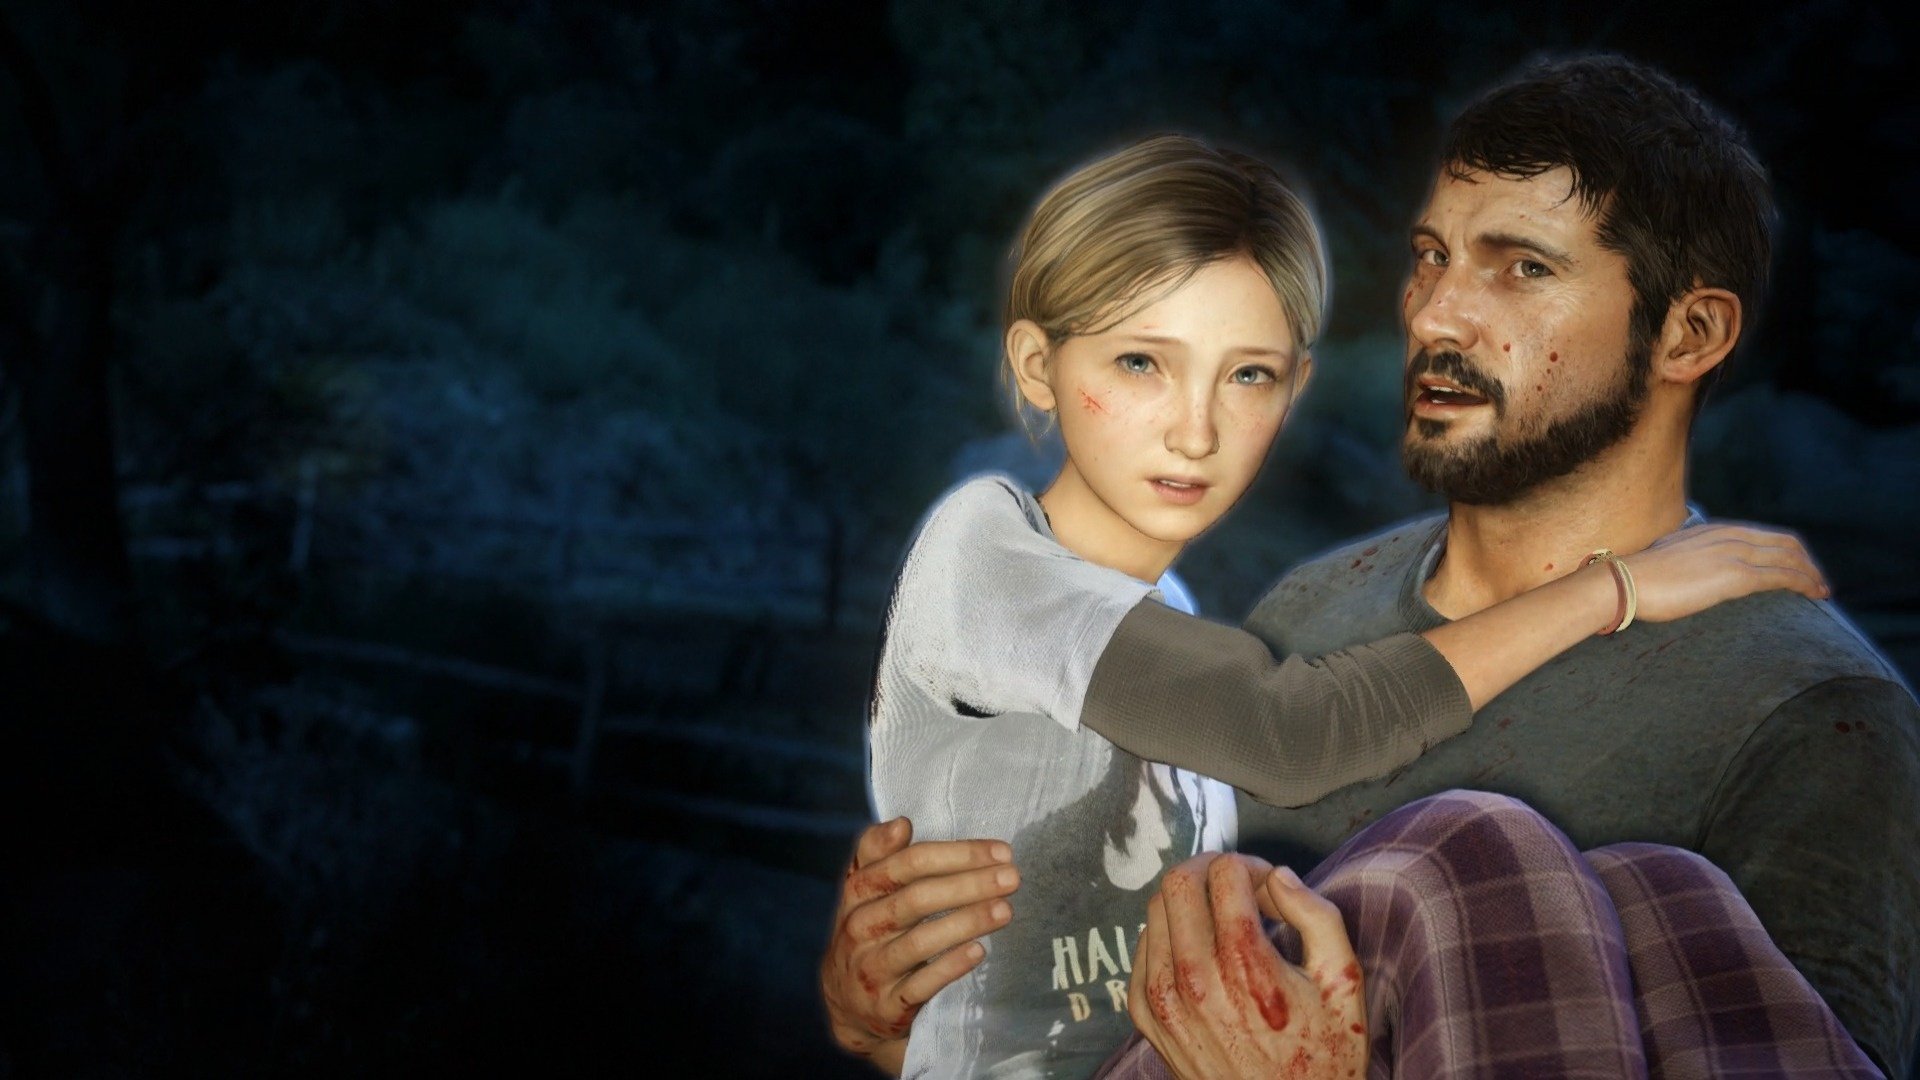 free download the last of us story